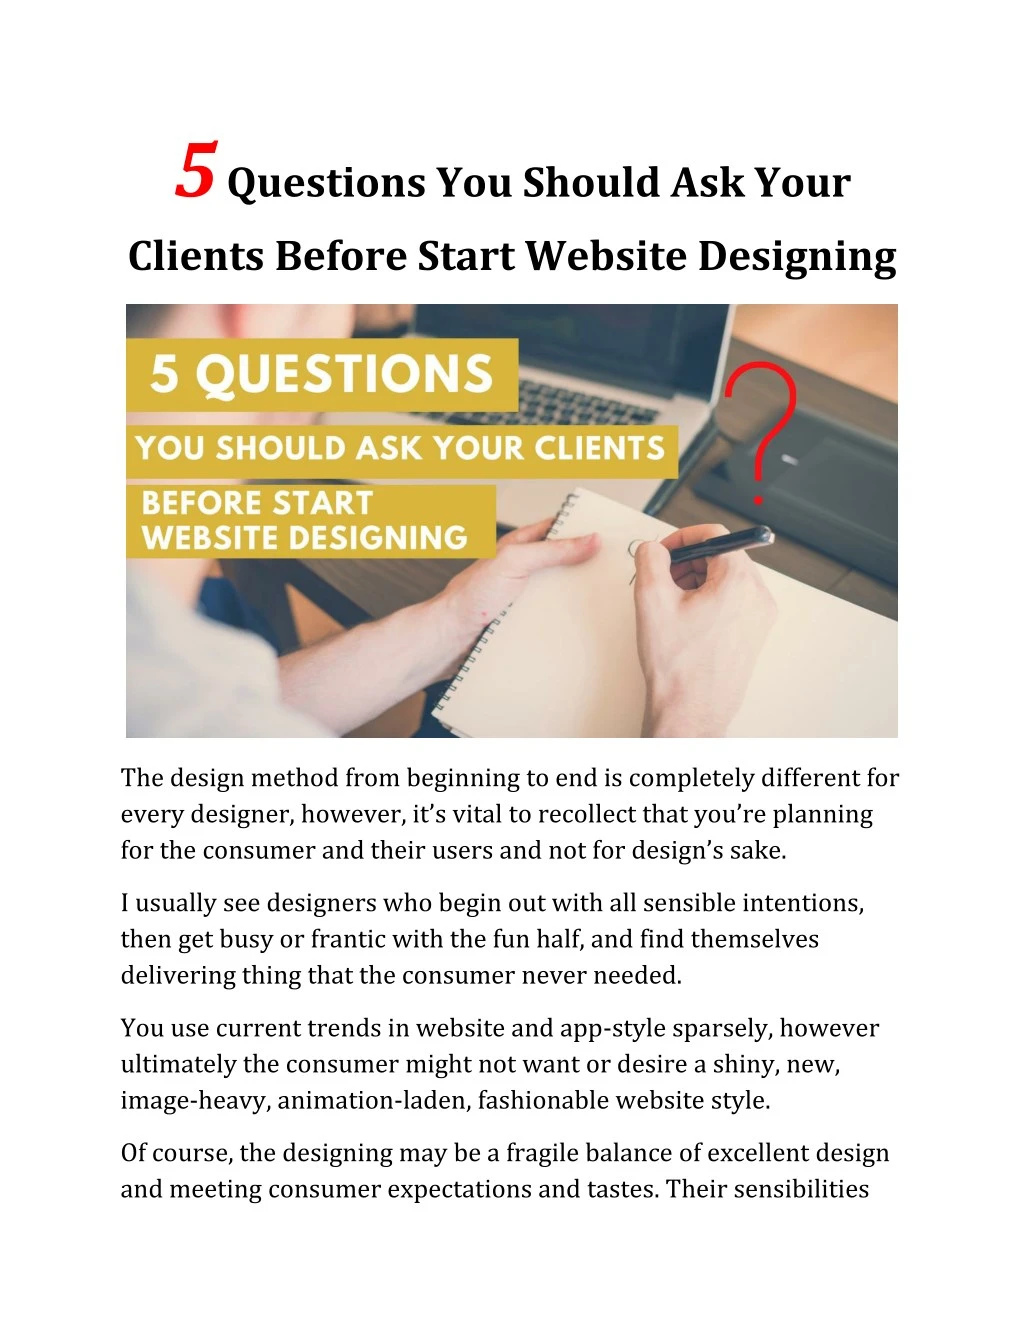 5 questions you should ask your clients before